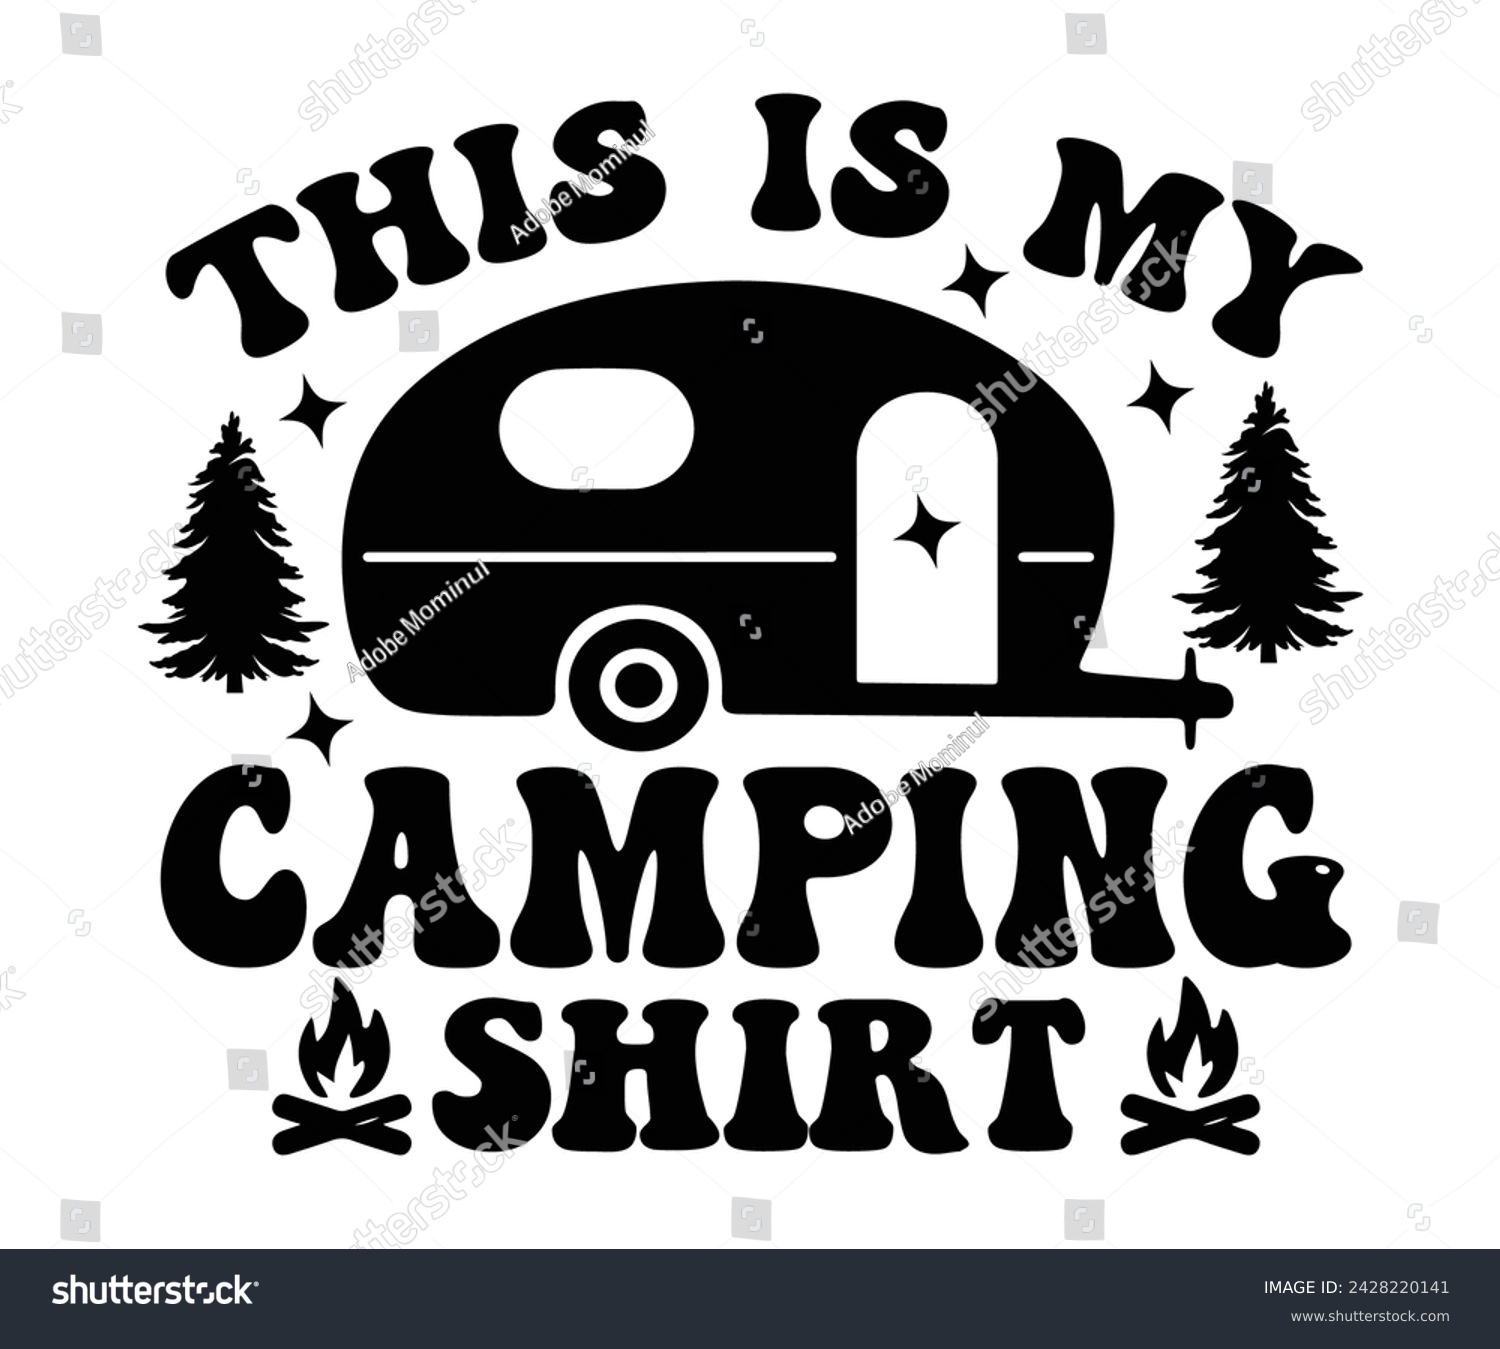 SVG of This Is My Camping Shirt Svg,Happy Camper Svg,Camping Svg,Adventure Svg,Hiking Svg,Camp Saying,Camp Life Svg,Svg Cut Files, Png,Mountain T-shirt,Instant Download svg